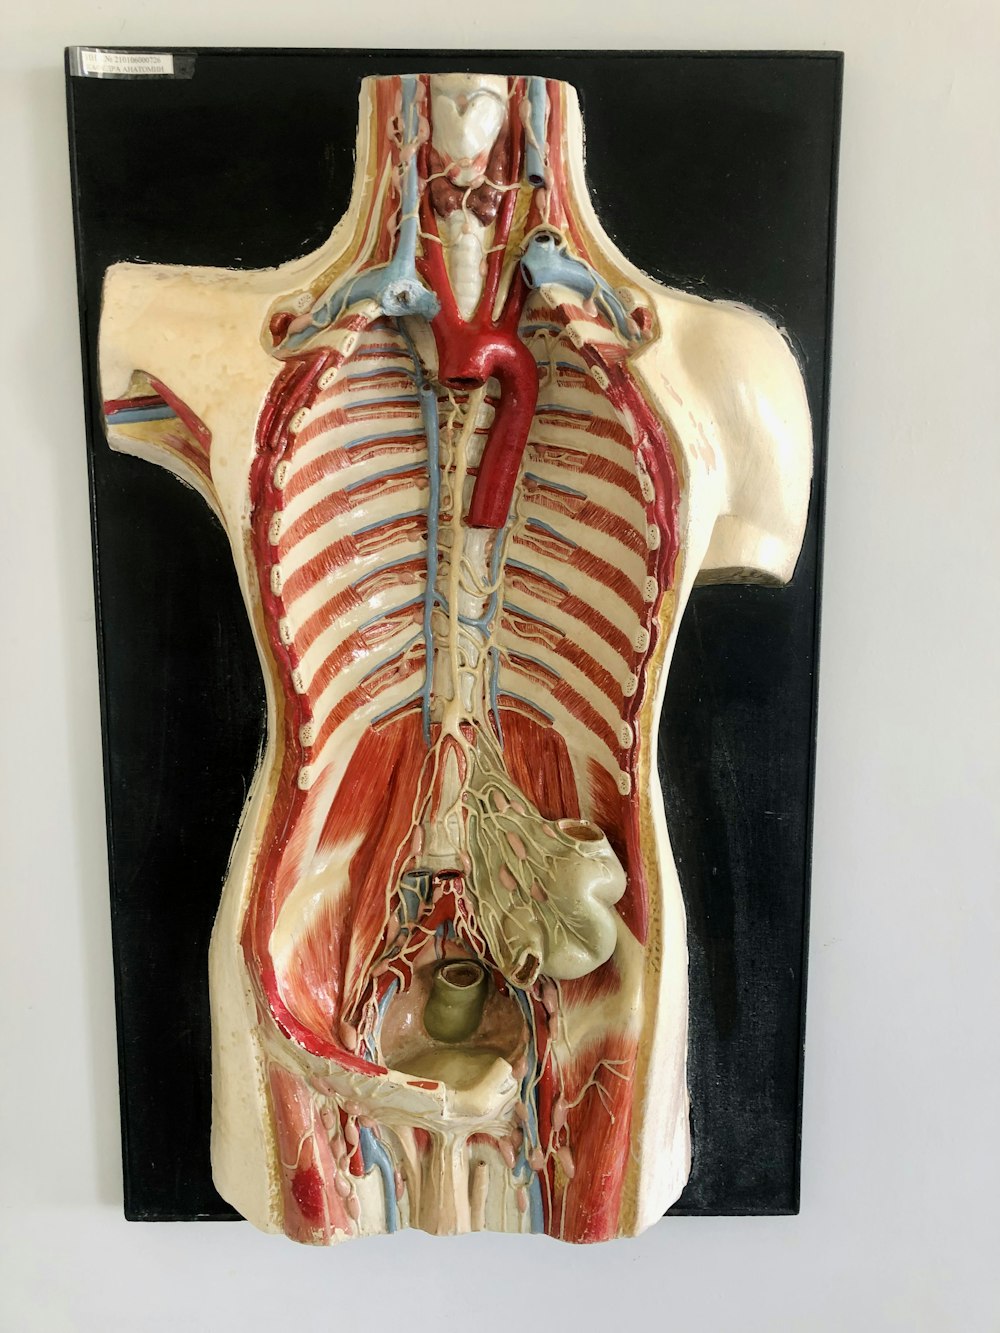 a medical model of the back of a human body